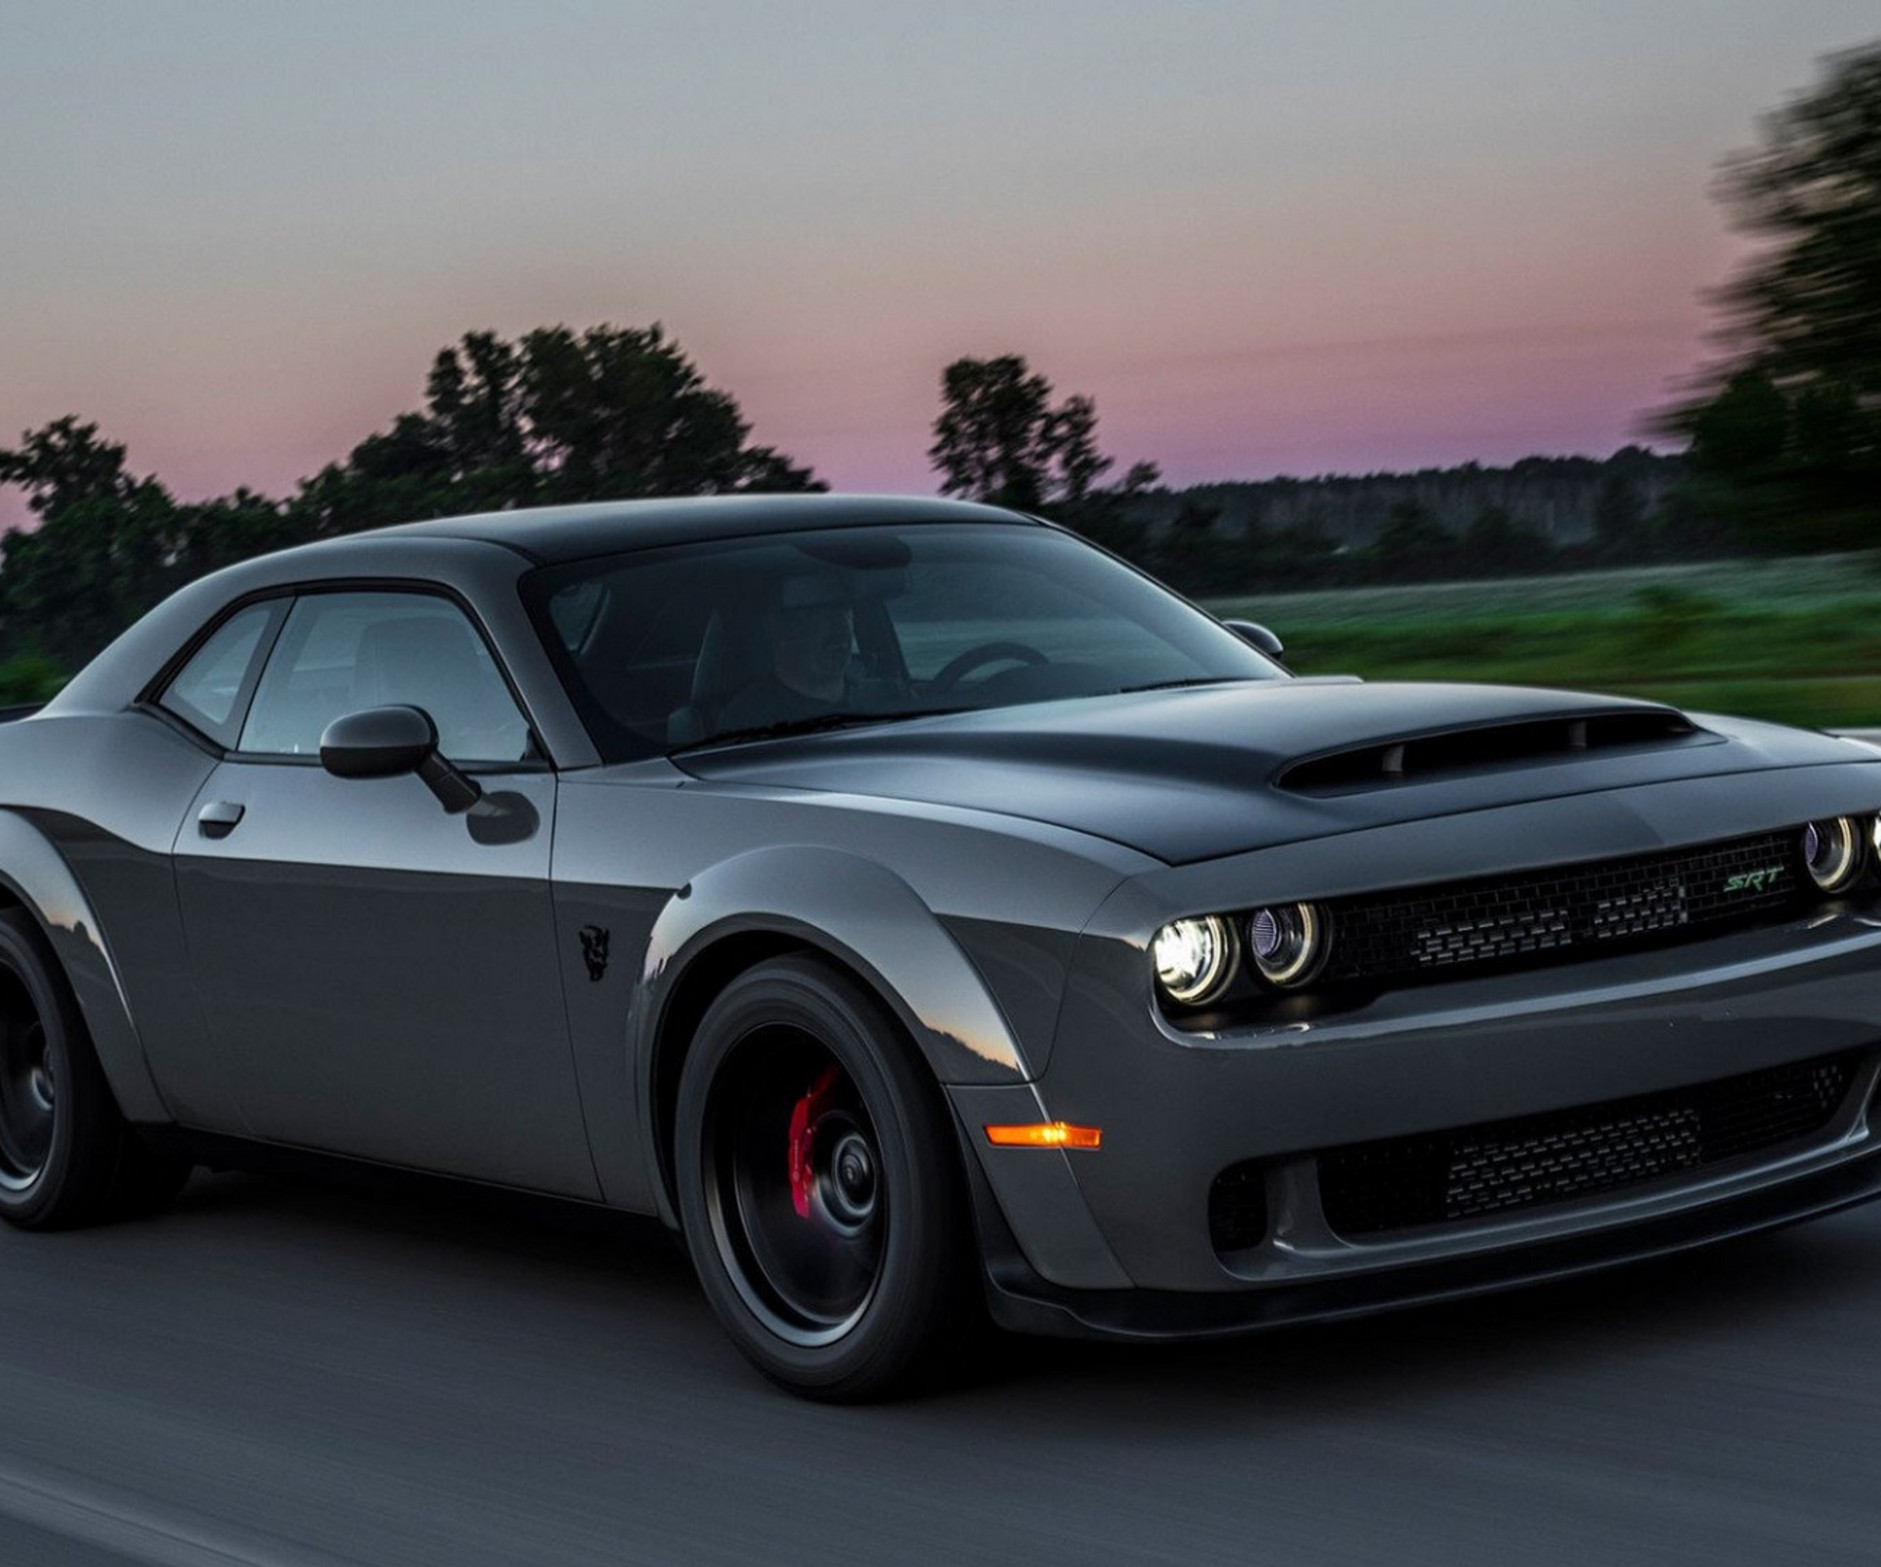 New Model and Performance 2022 Dodge Challenger